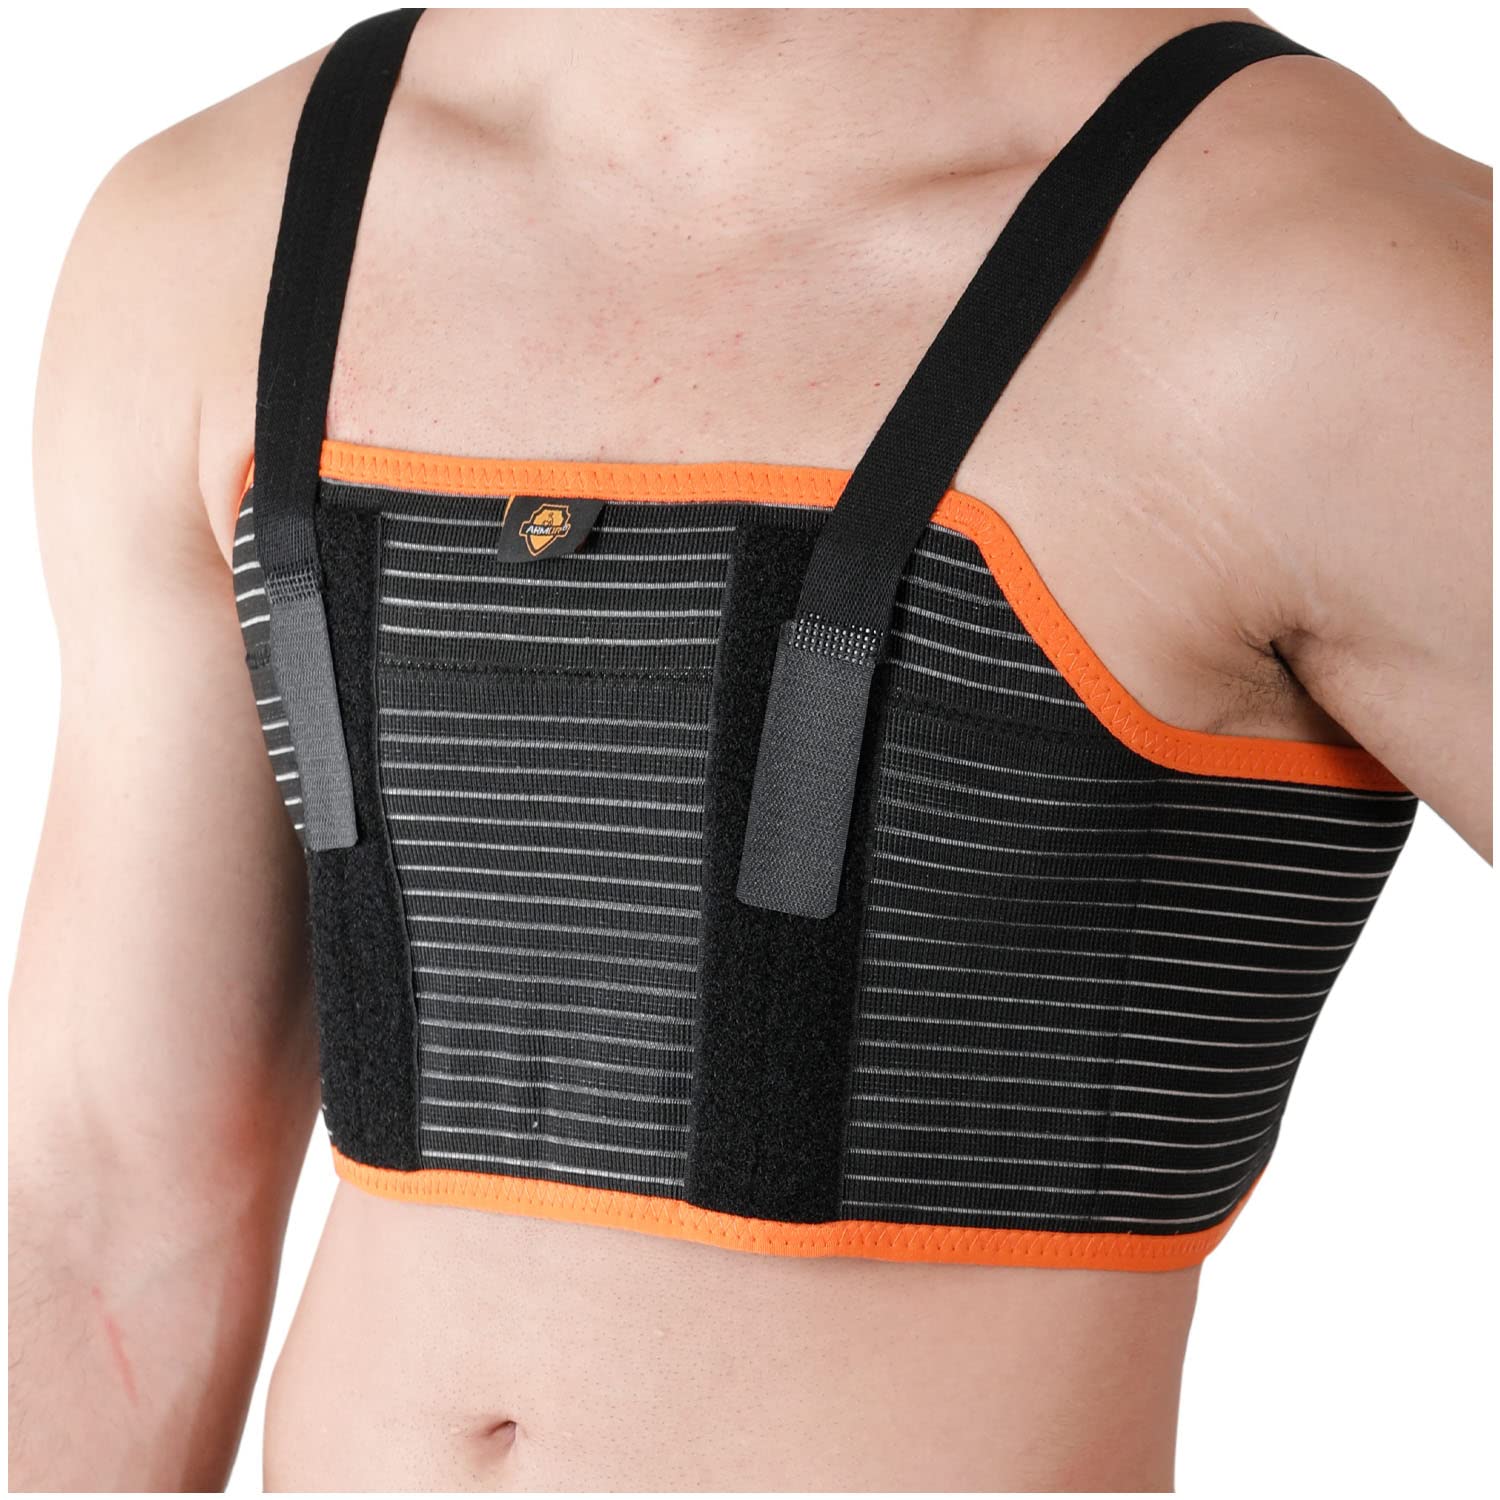 Armor Adult Unisex Chest Support Brace with 2 Metal Inserts to